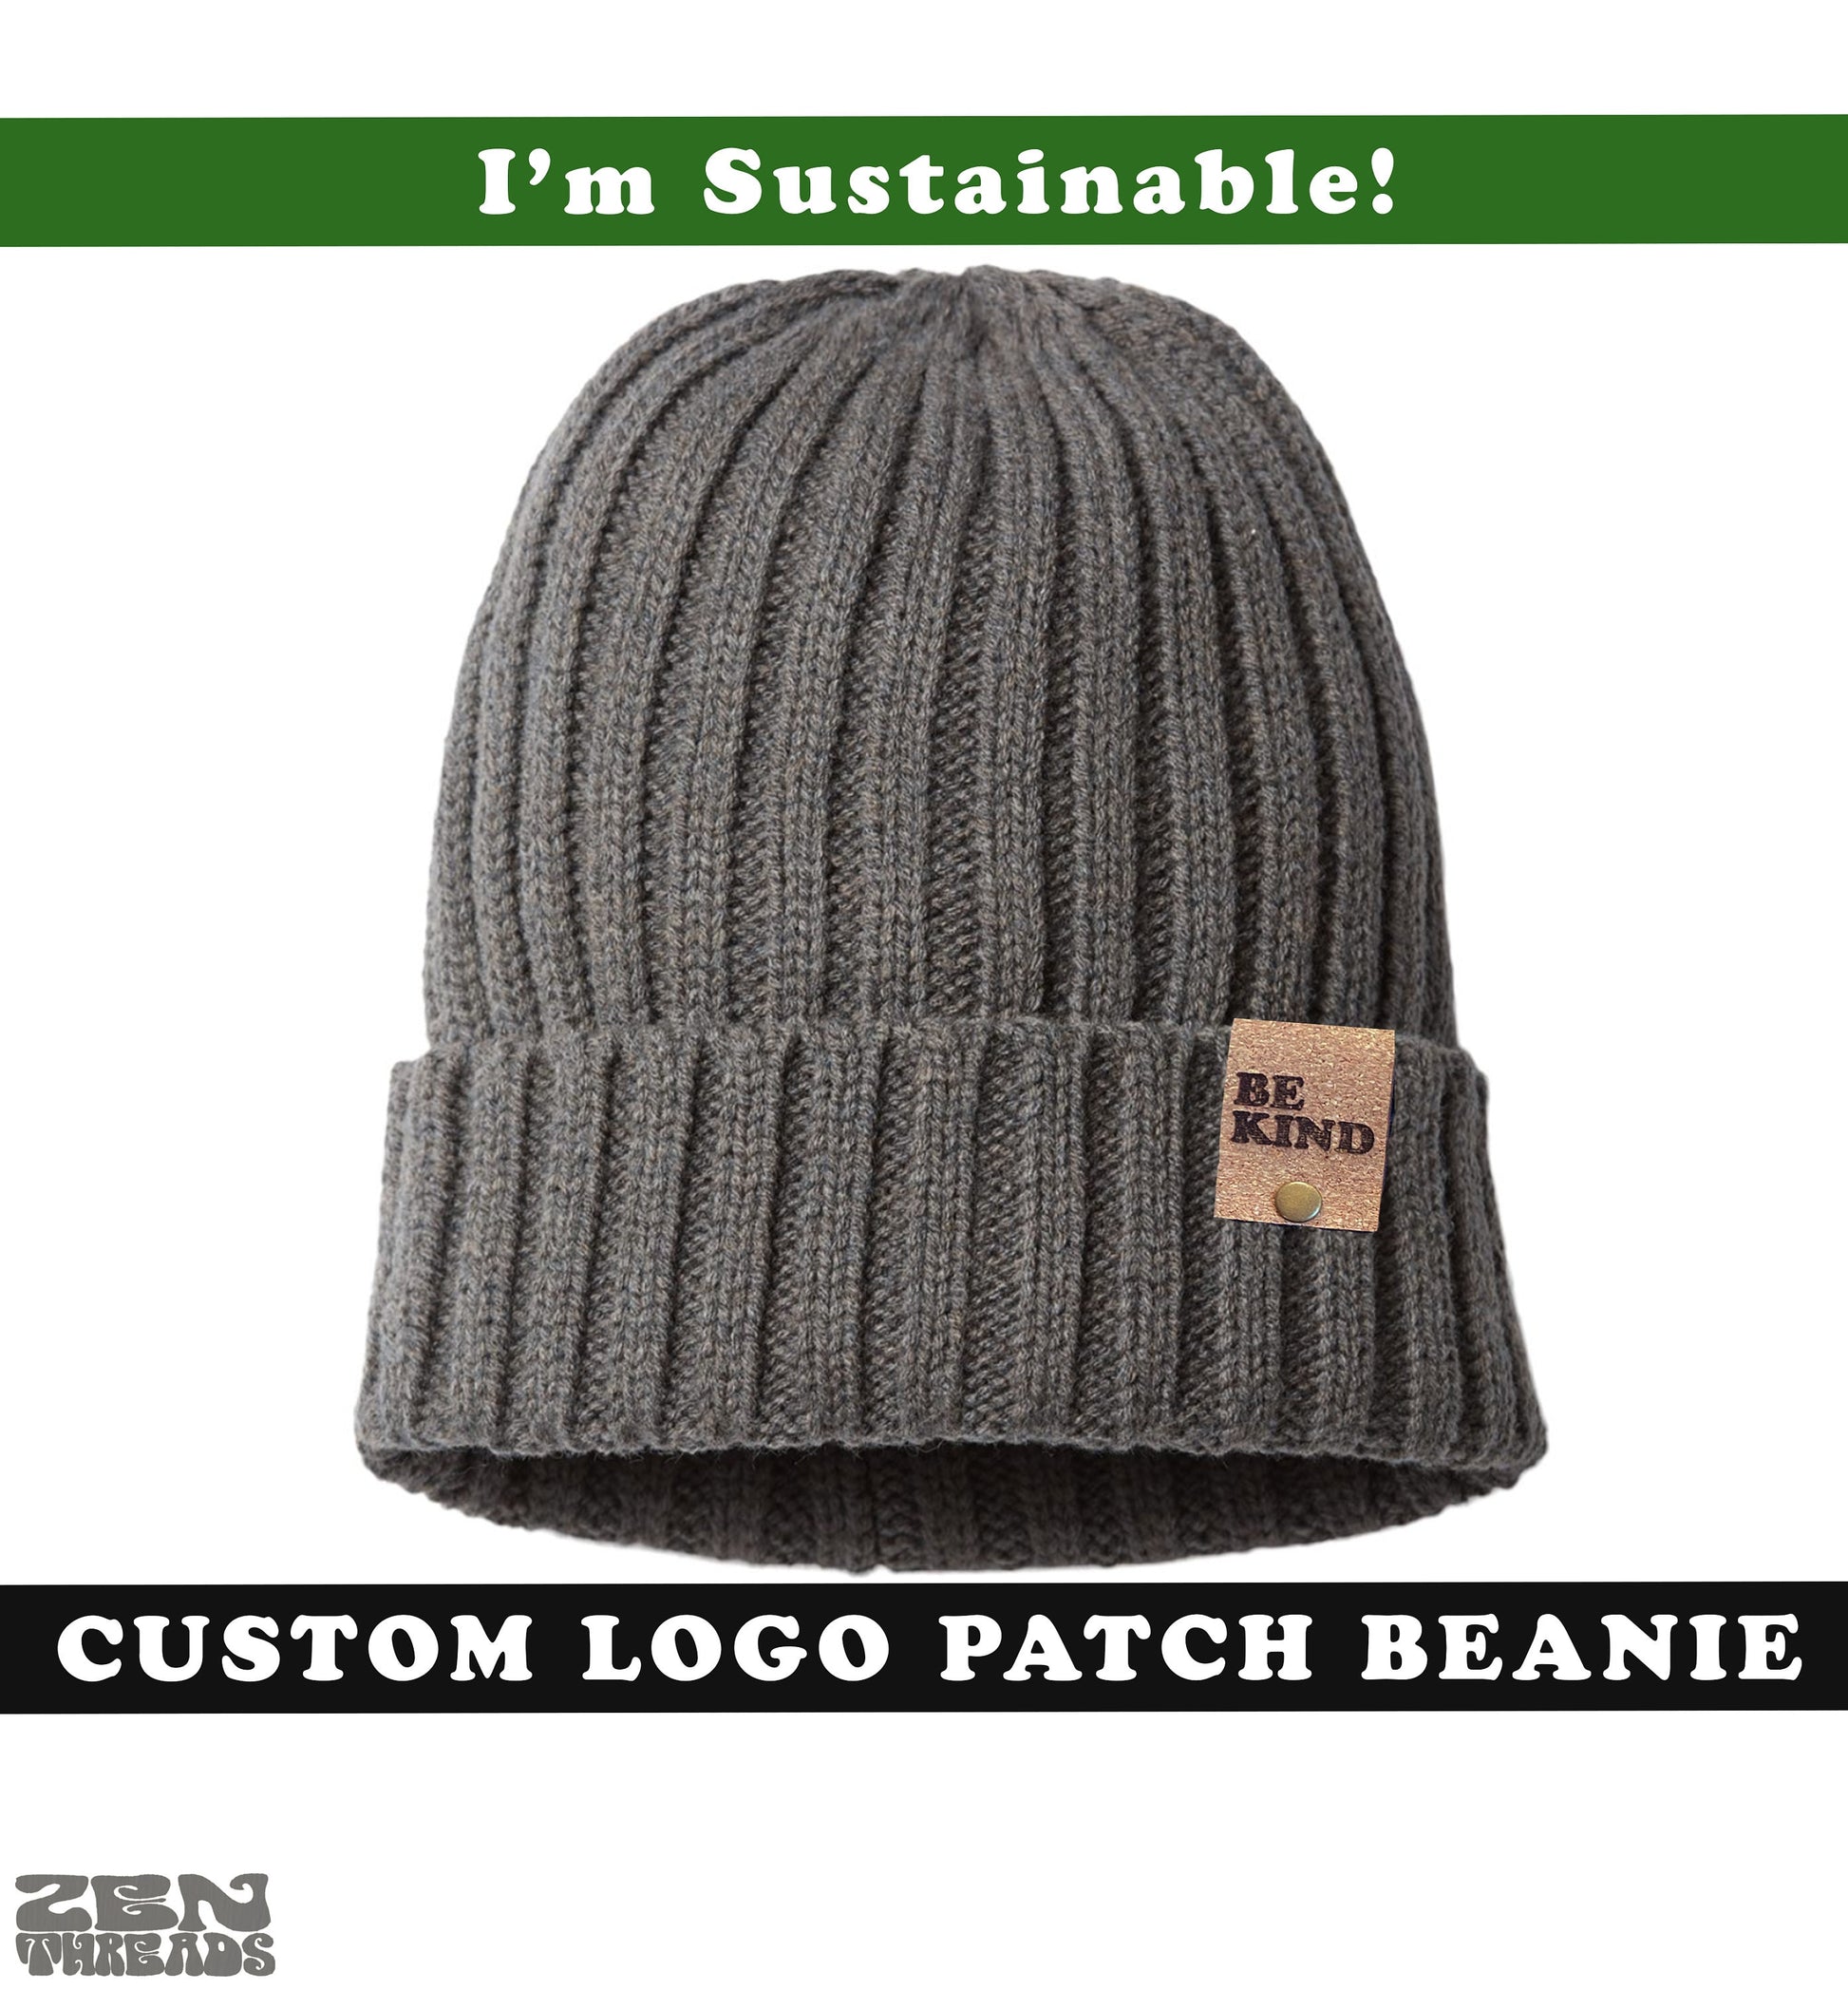 Sustainable CUSTOM PATCH Beanie Leather leatherette vegan laser engraved customized initials personalized hat logo business swag tag hat